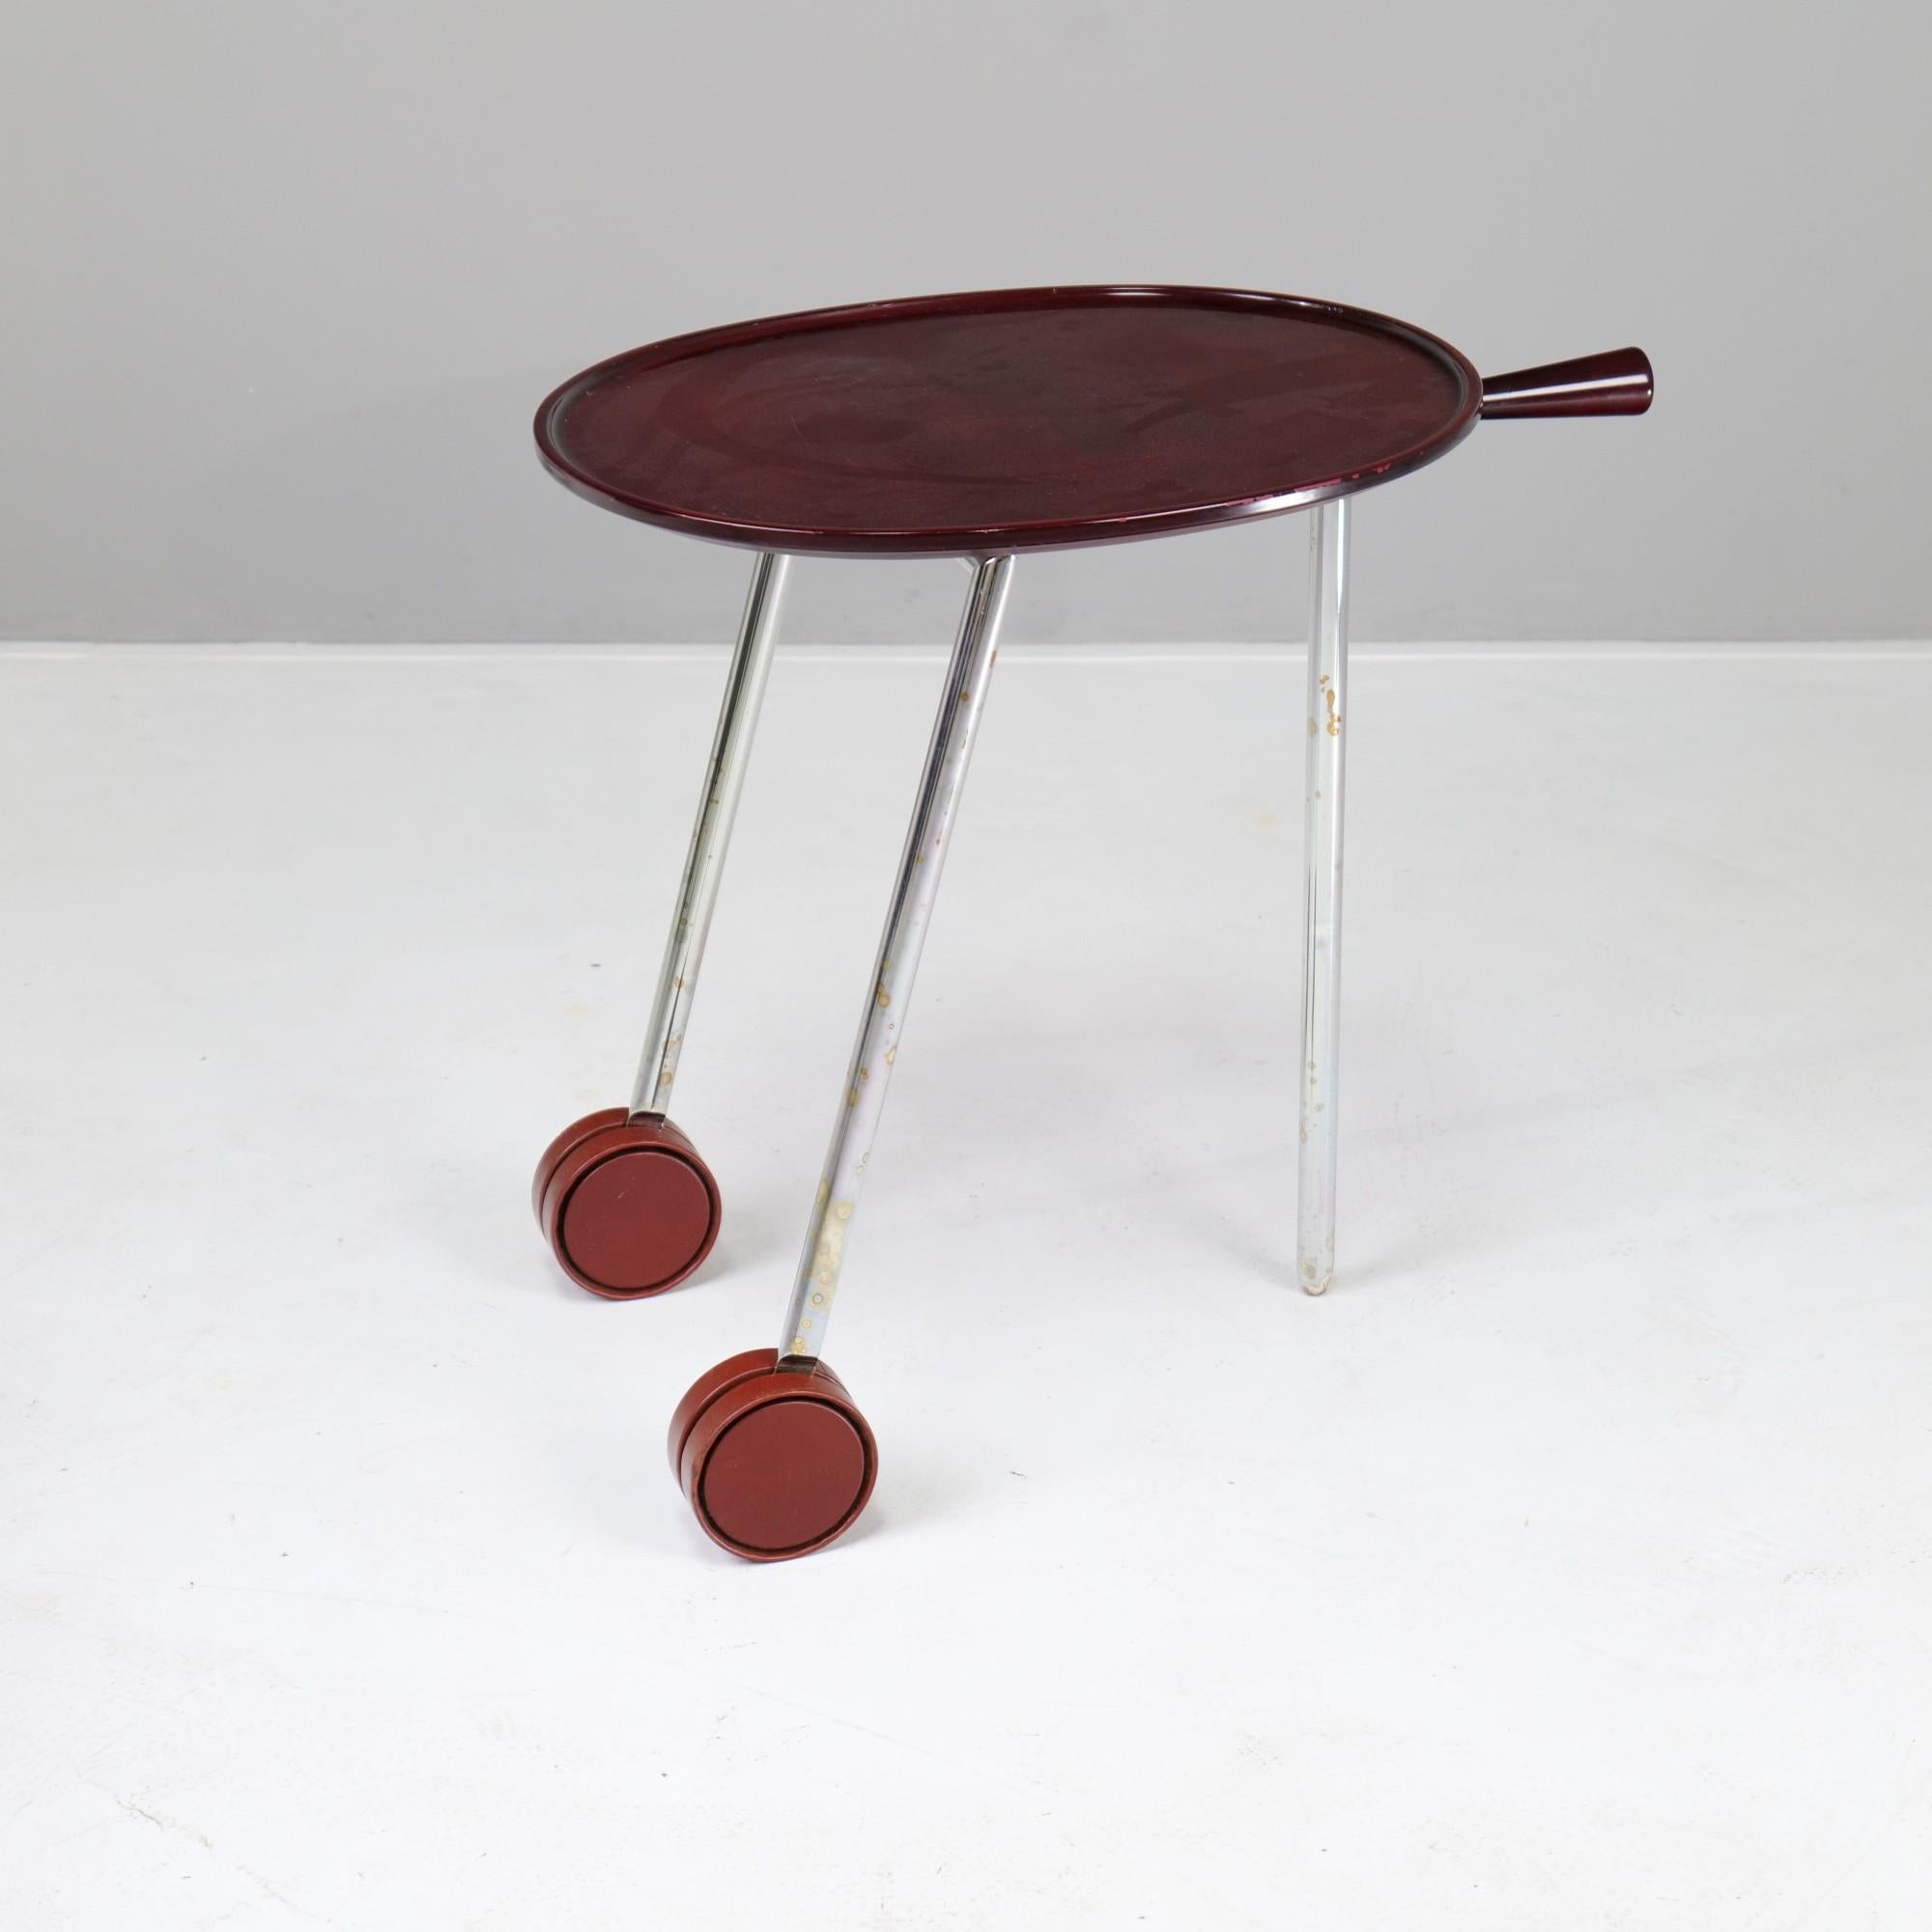 Antonio Citterio designed a small side table on castors with a Bordeaux red lacquered oval top.

The table can be moved by means of a handle.